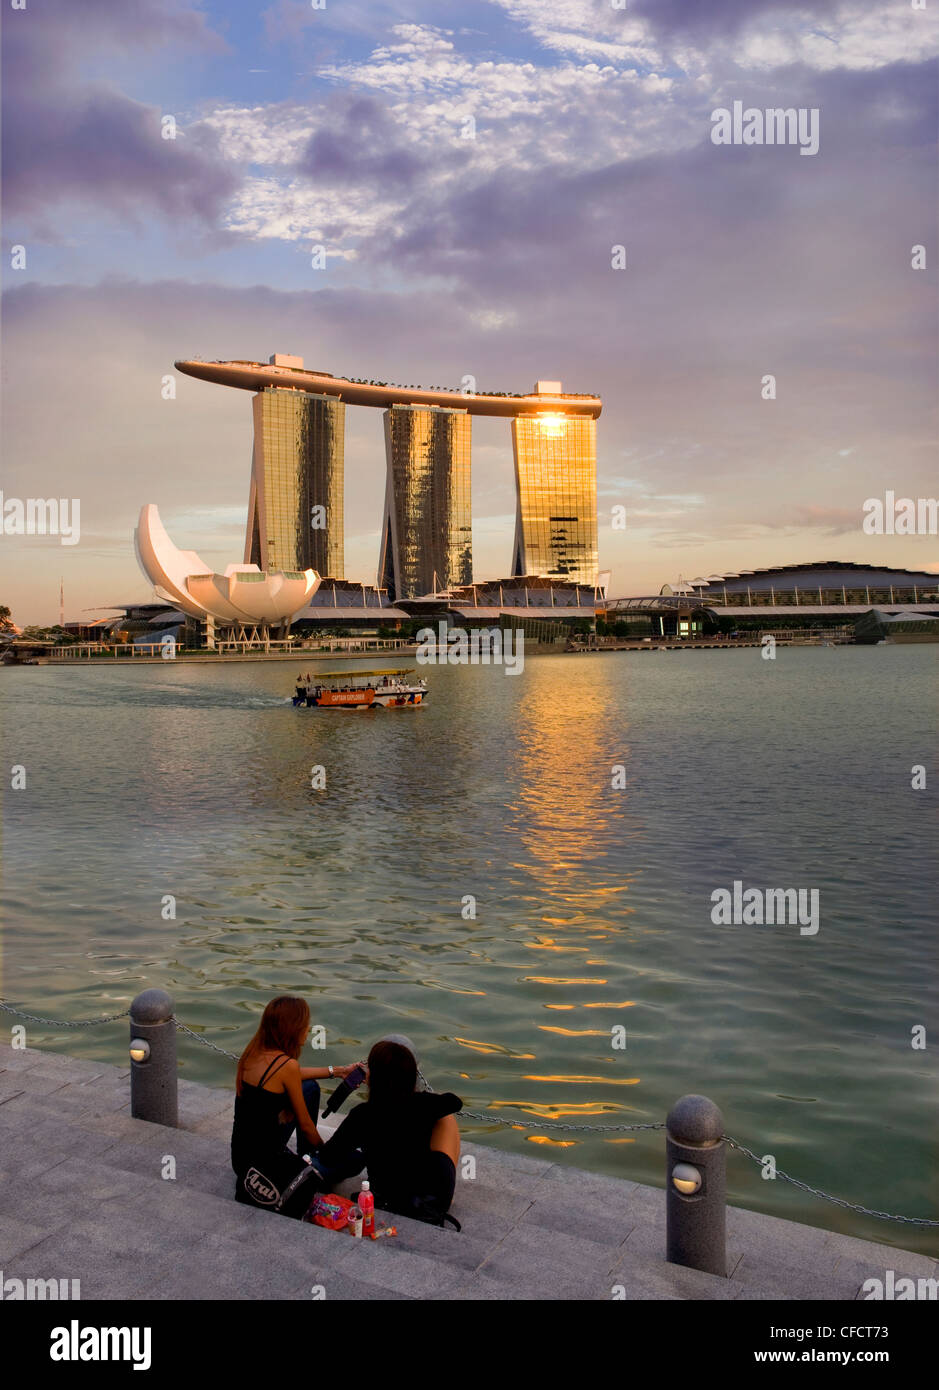 Marina Bay Sands Resort and Casino, designed by Moshe Safdie, Singapore, Southeast Asia, Asia Stock Photo